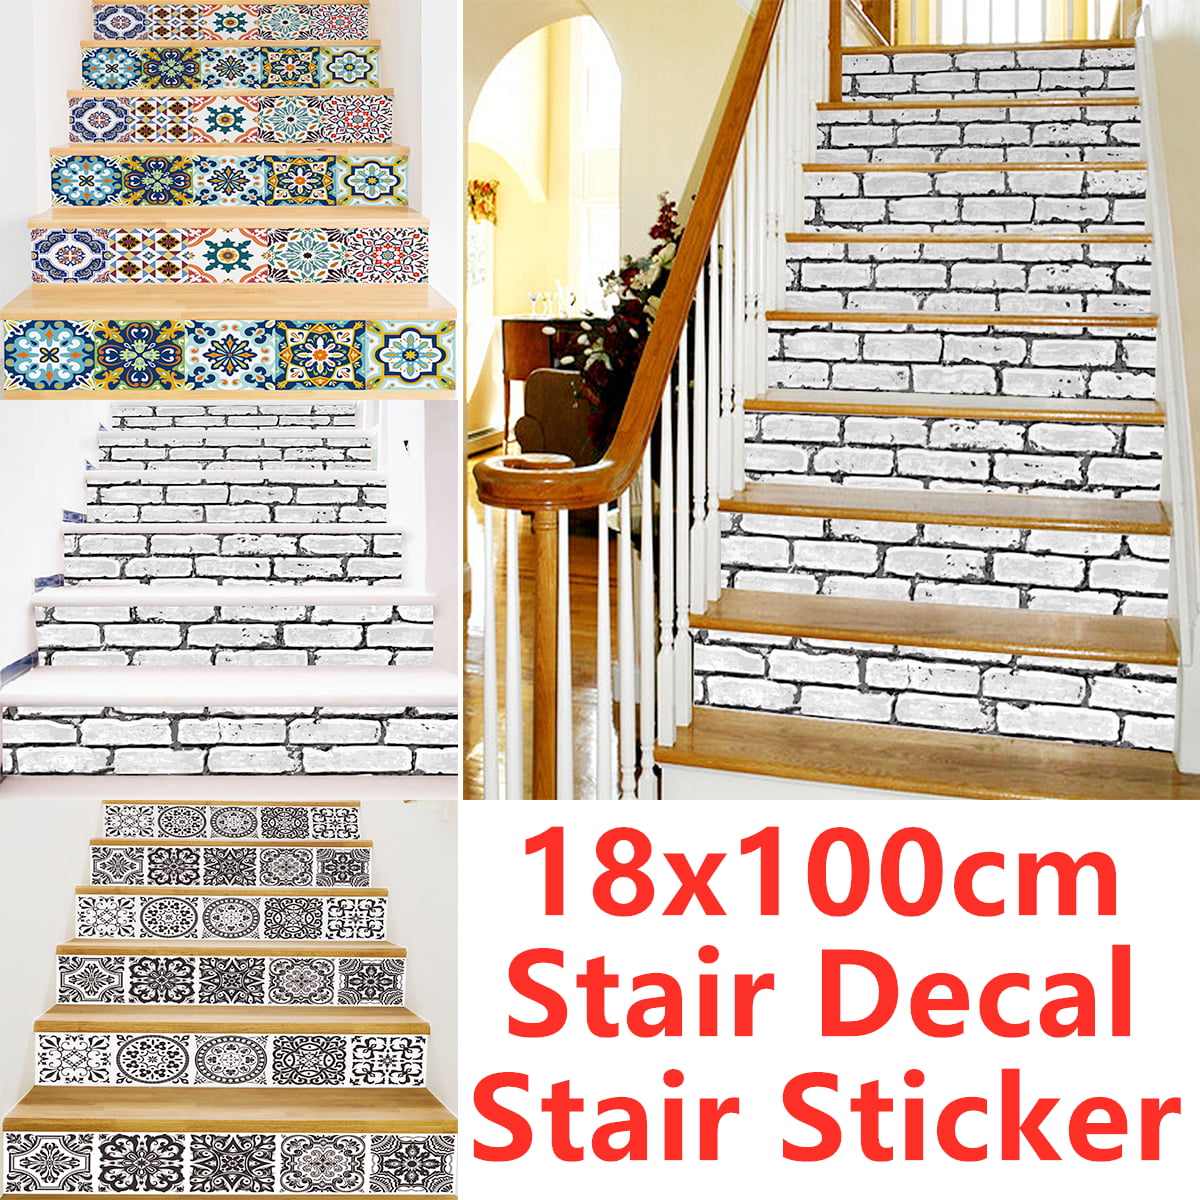 100cm Stair Stickers PVC Wood Pattern Decoration Removable Useful Brandnew 18 